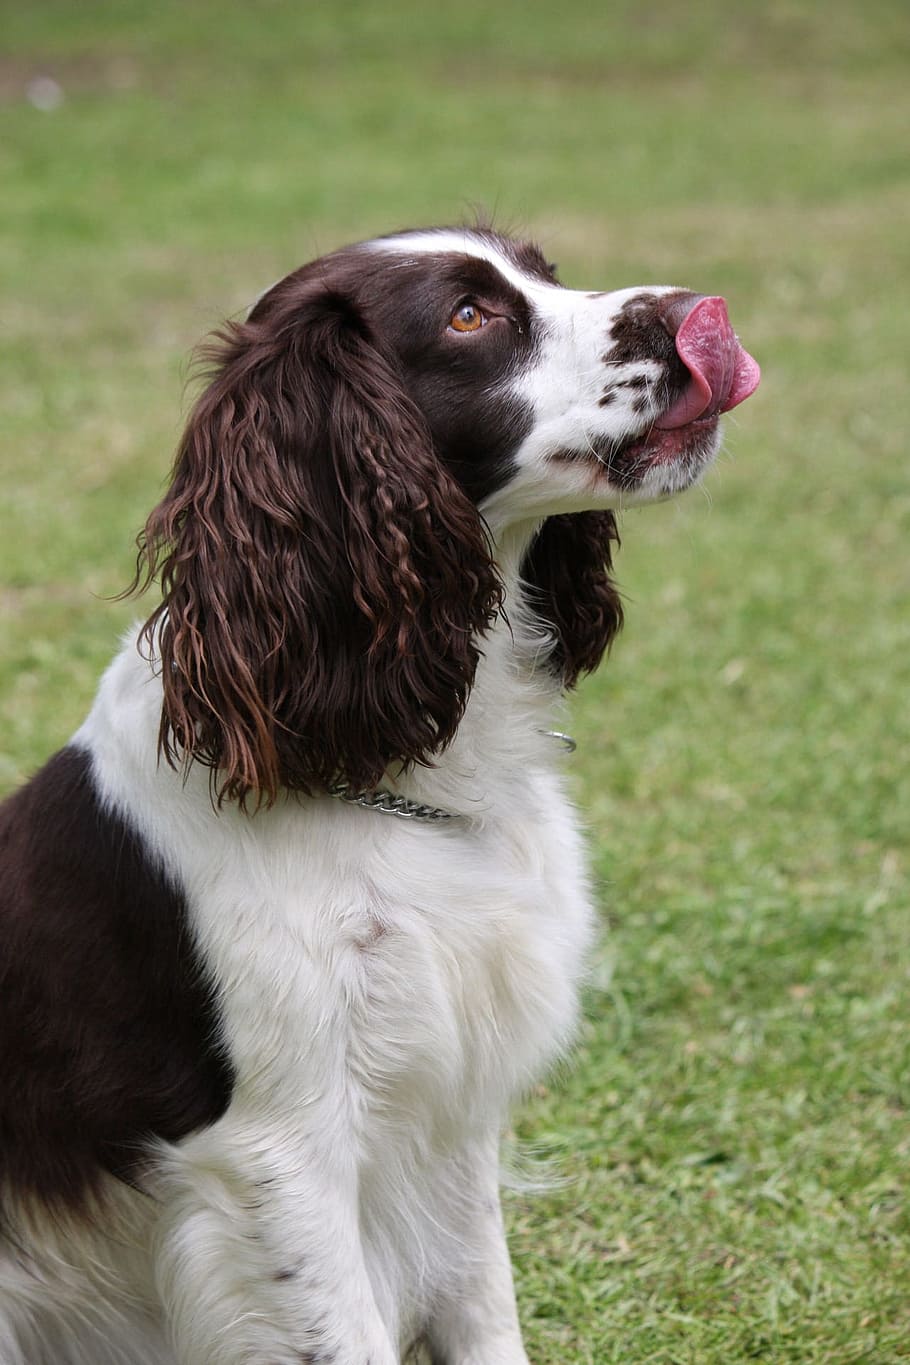 adult welsh springer spaniel, sitting, grass field, Dog, Licking, Lips, Tongue, licking lips, english springer spaniel, springer